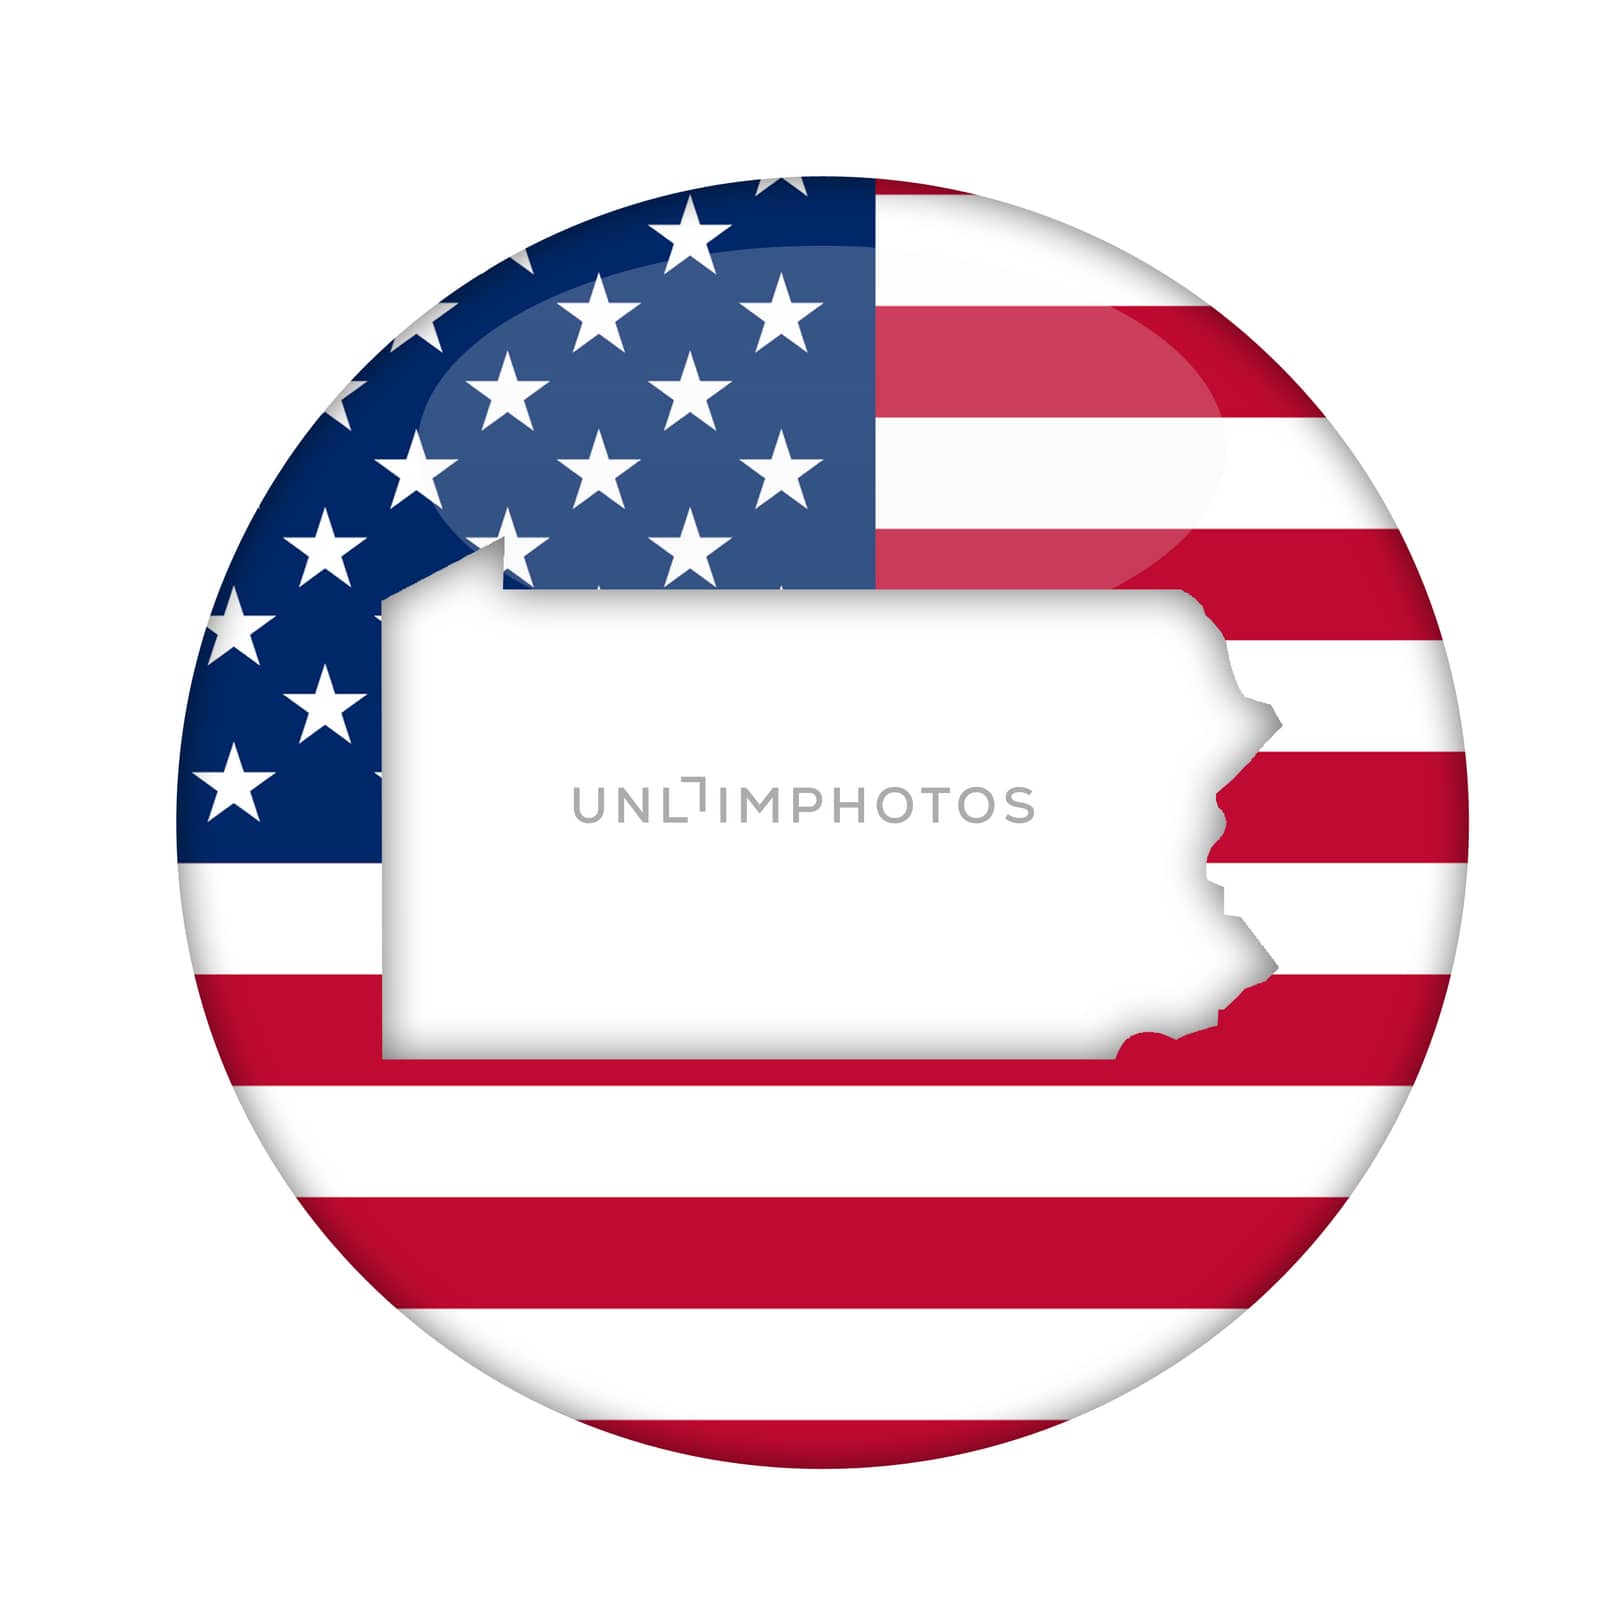 Pennsylvania state of America badge isolated on a white background.